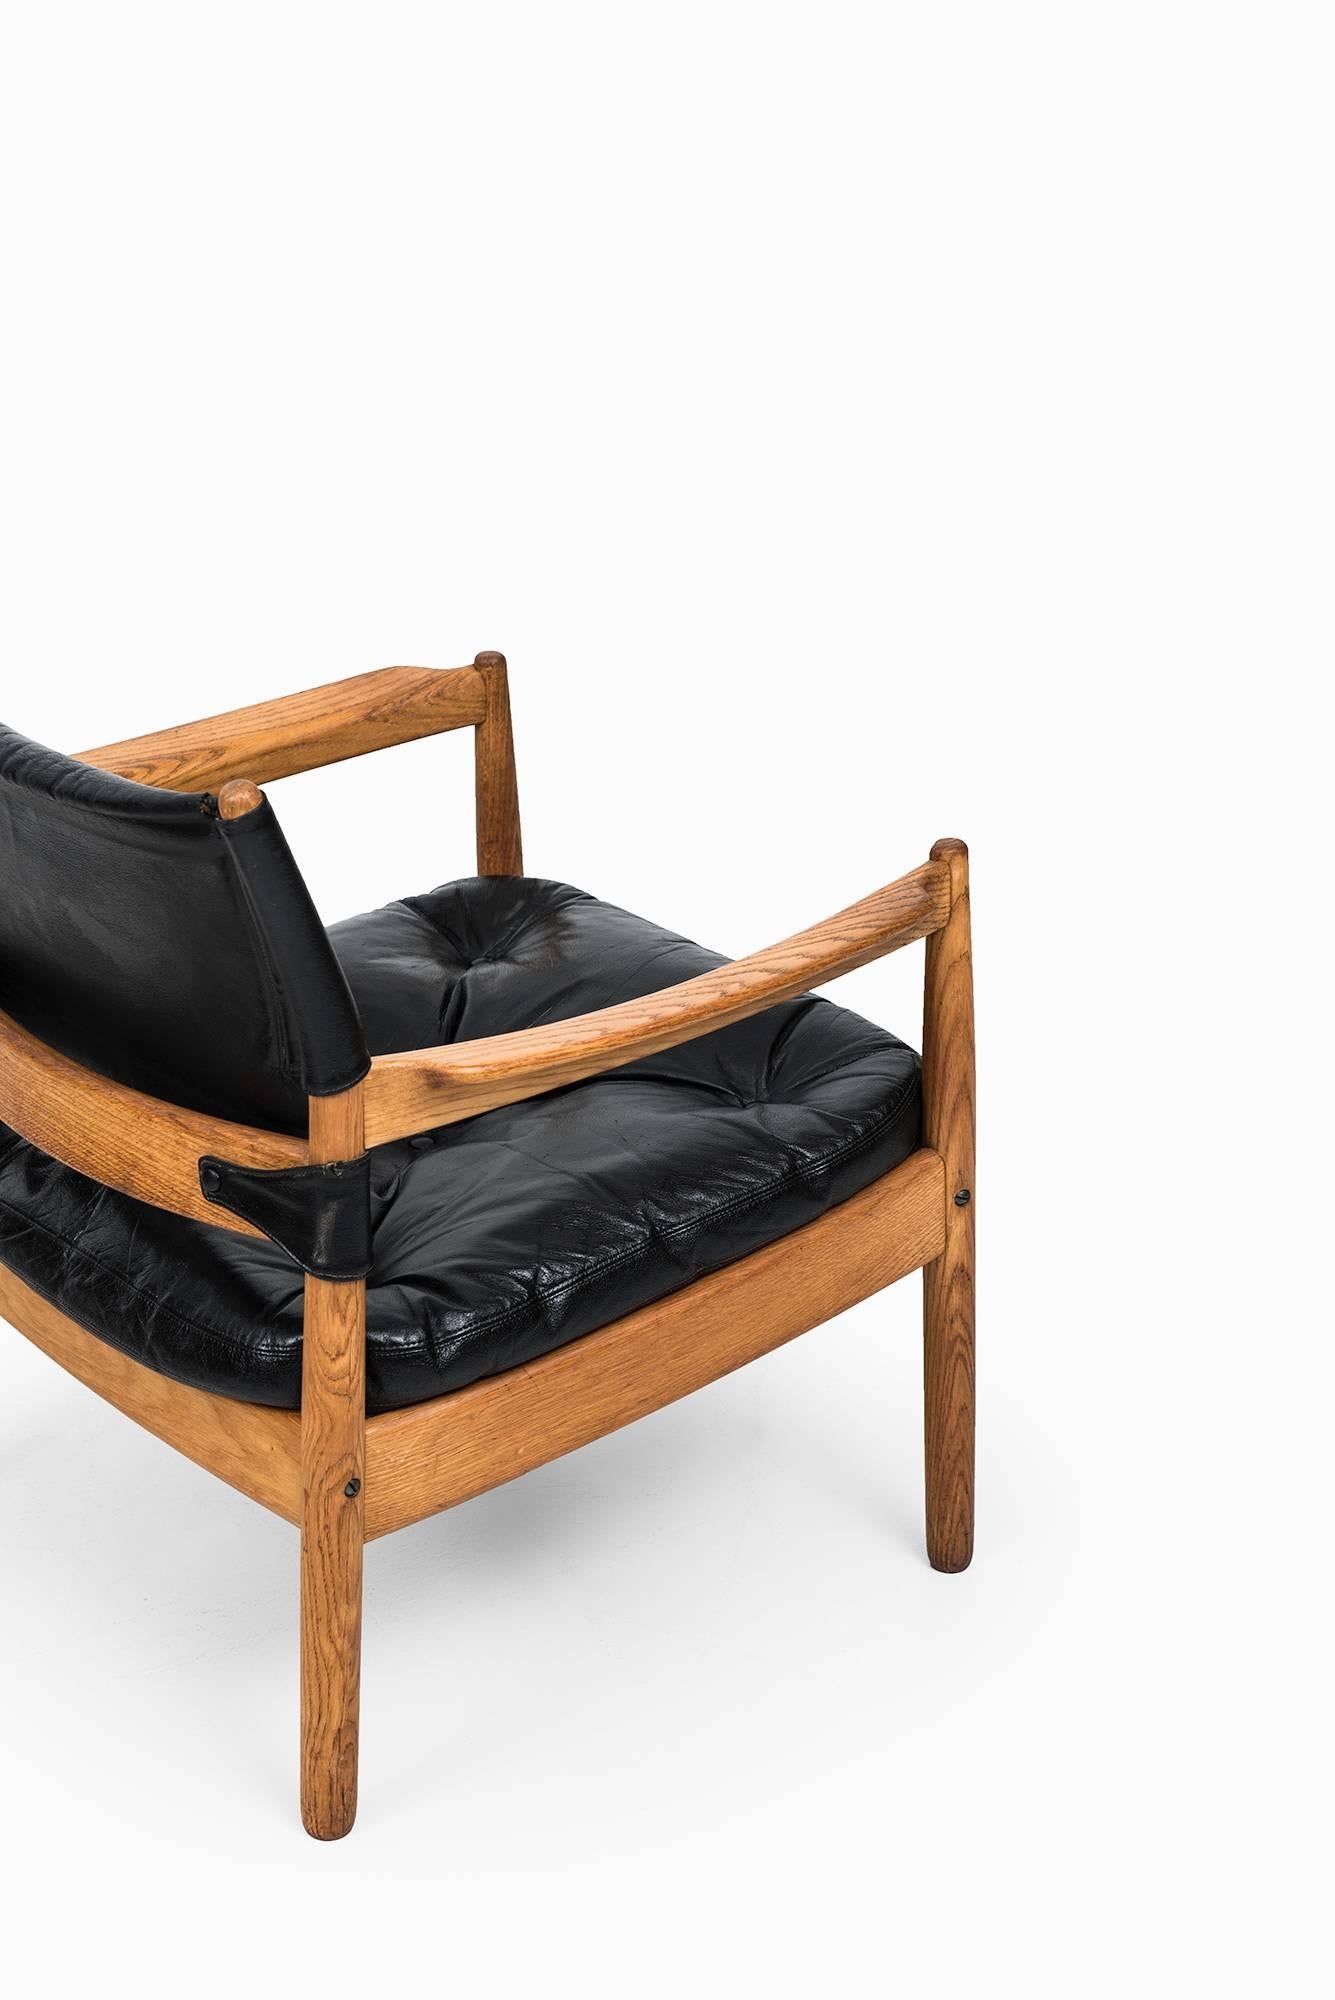 Leather Gunnar Myrstrand Easy Chairs by Källemo in Sweden